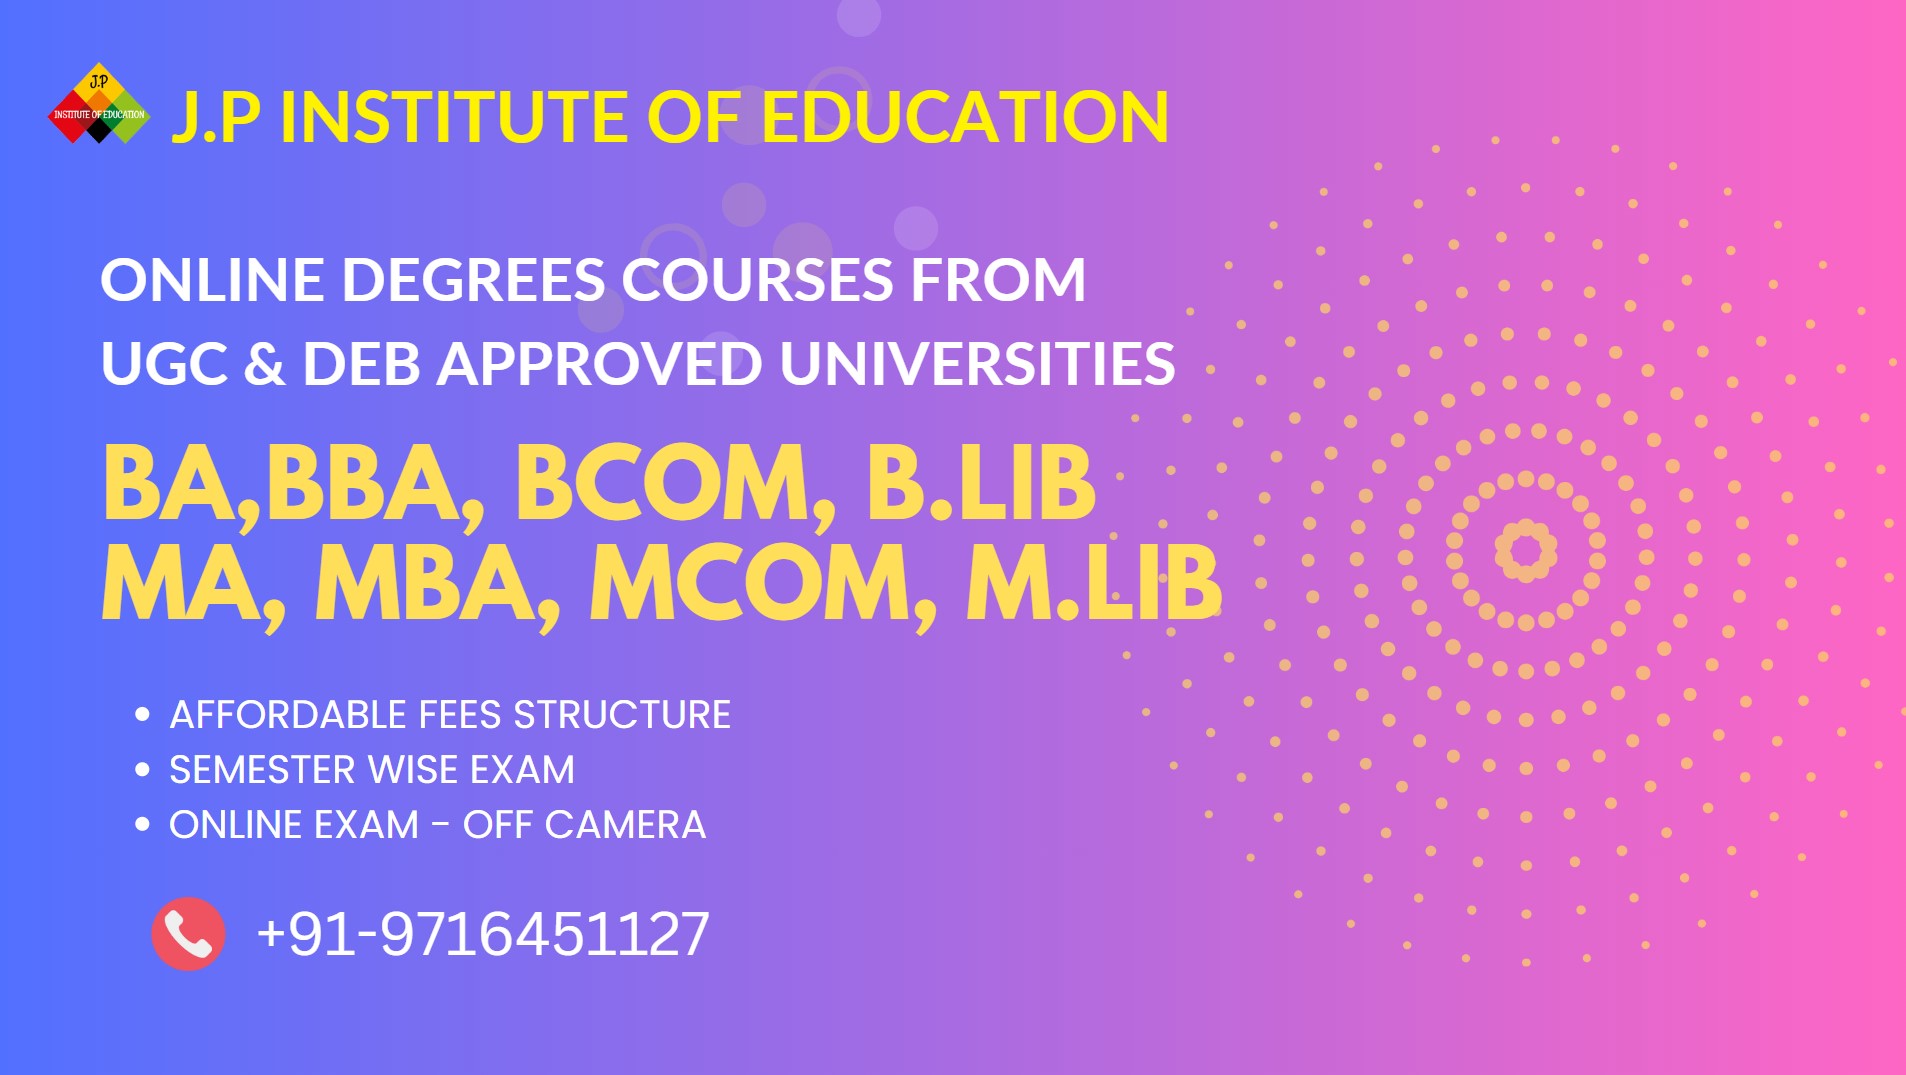 ONLINE DEGREE COURSES FROM UGC AND APPROVED UNIVERSITITES